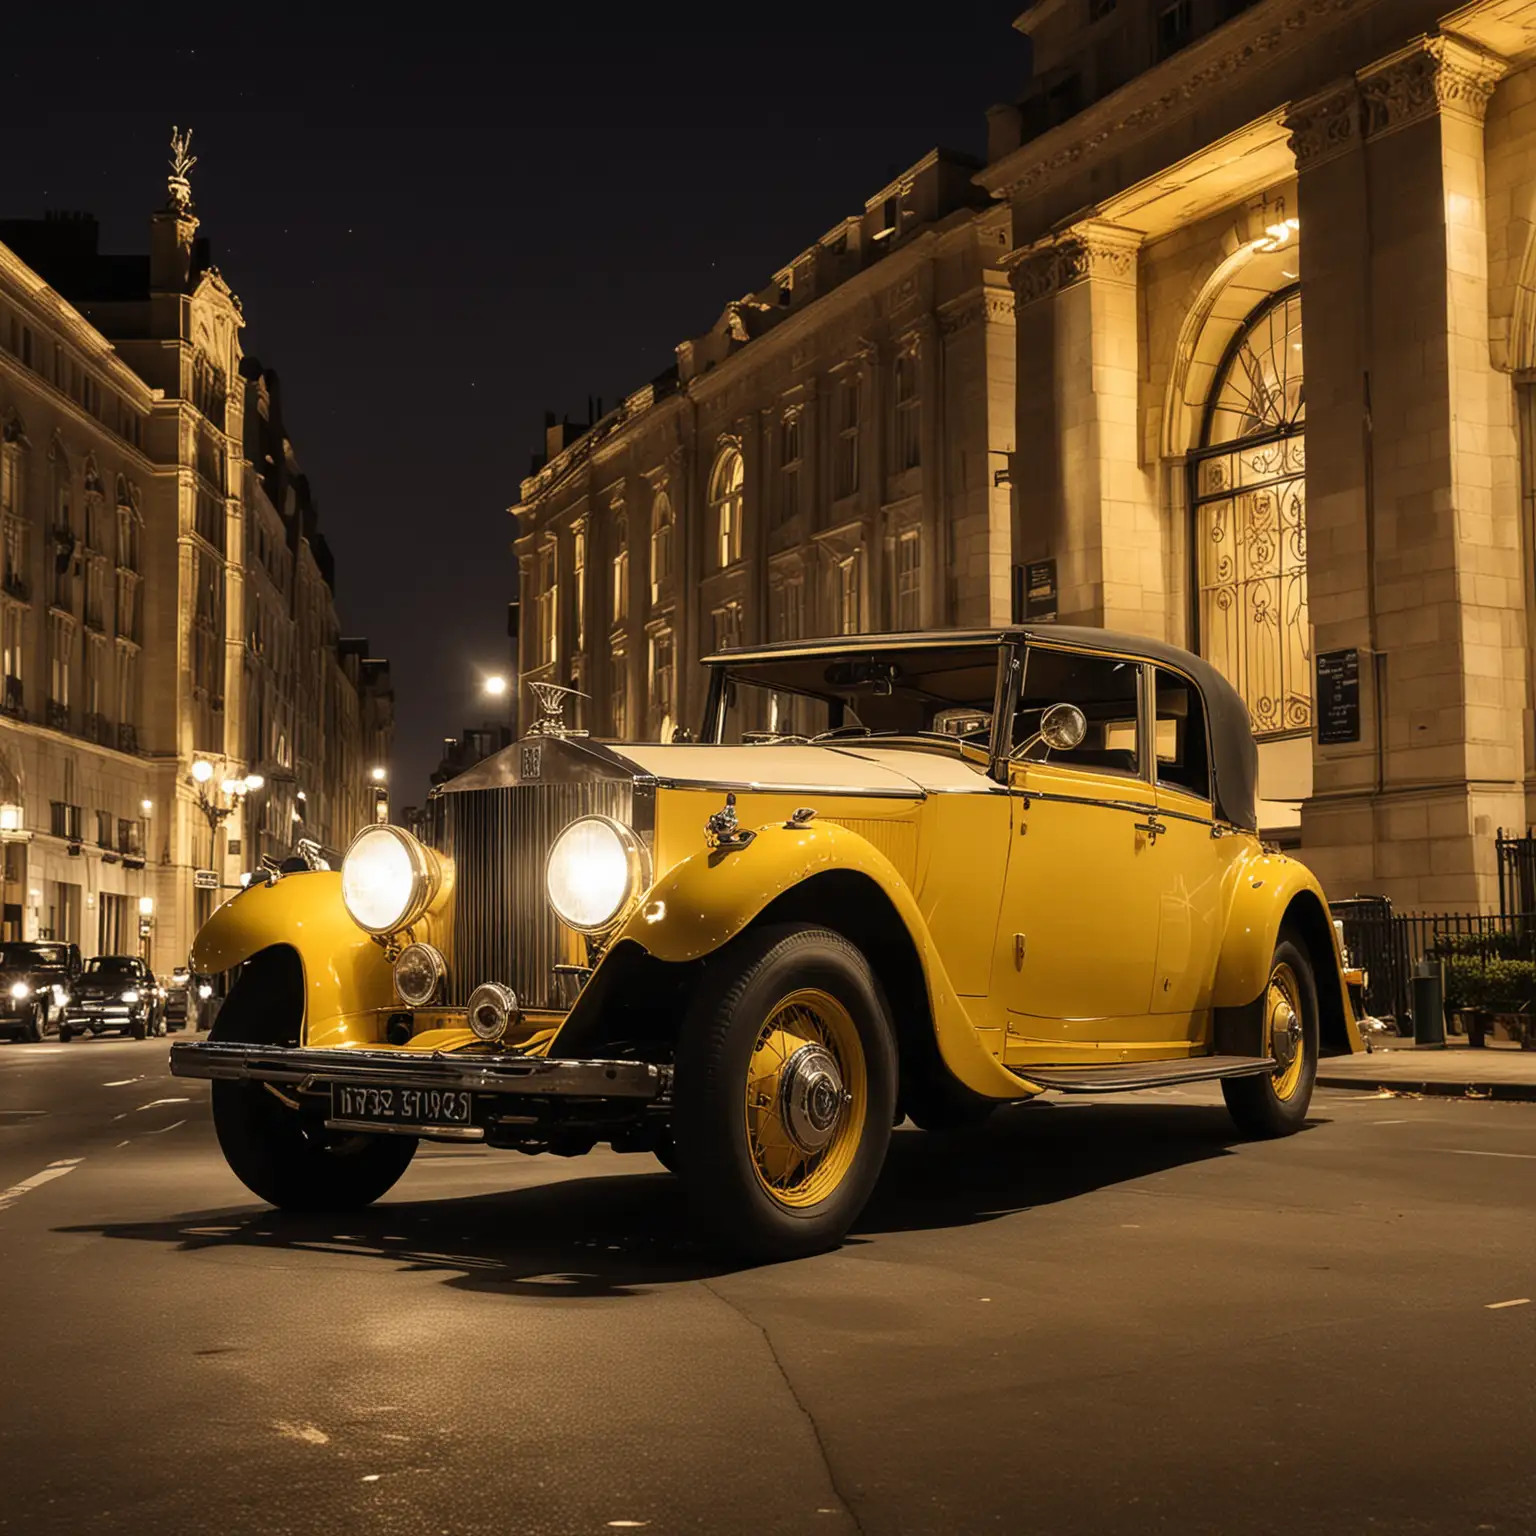 A yellow 1920s Rolls Royce at night art deco building in background